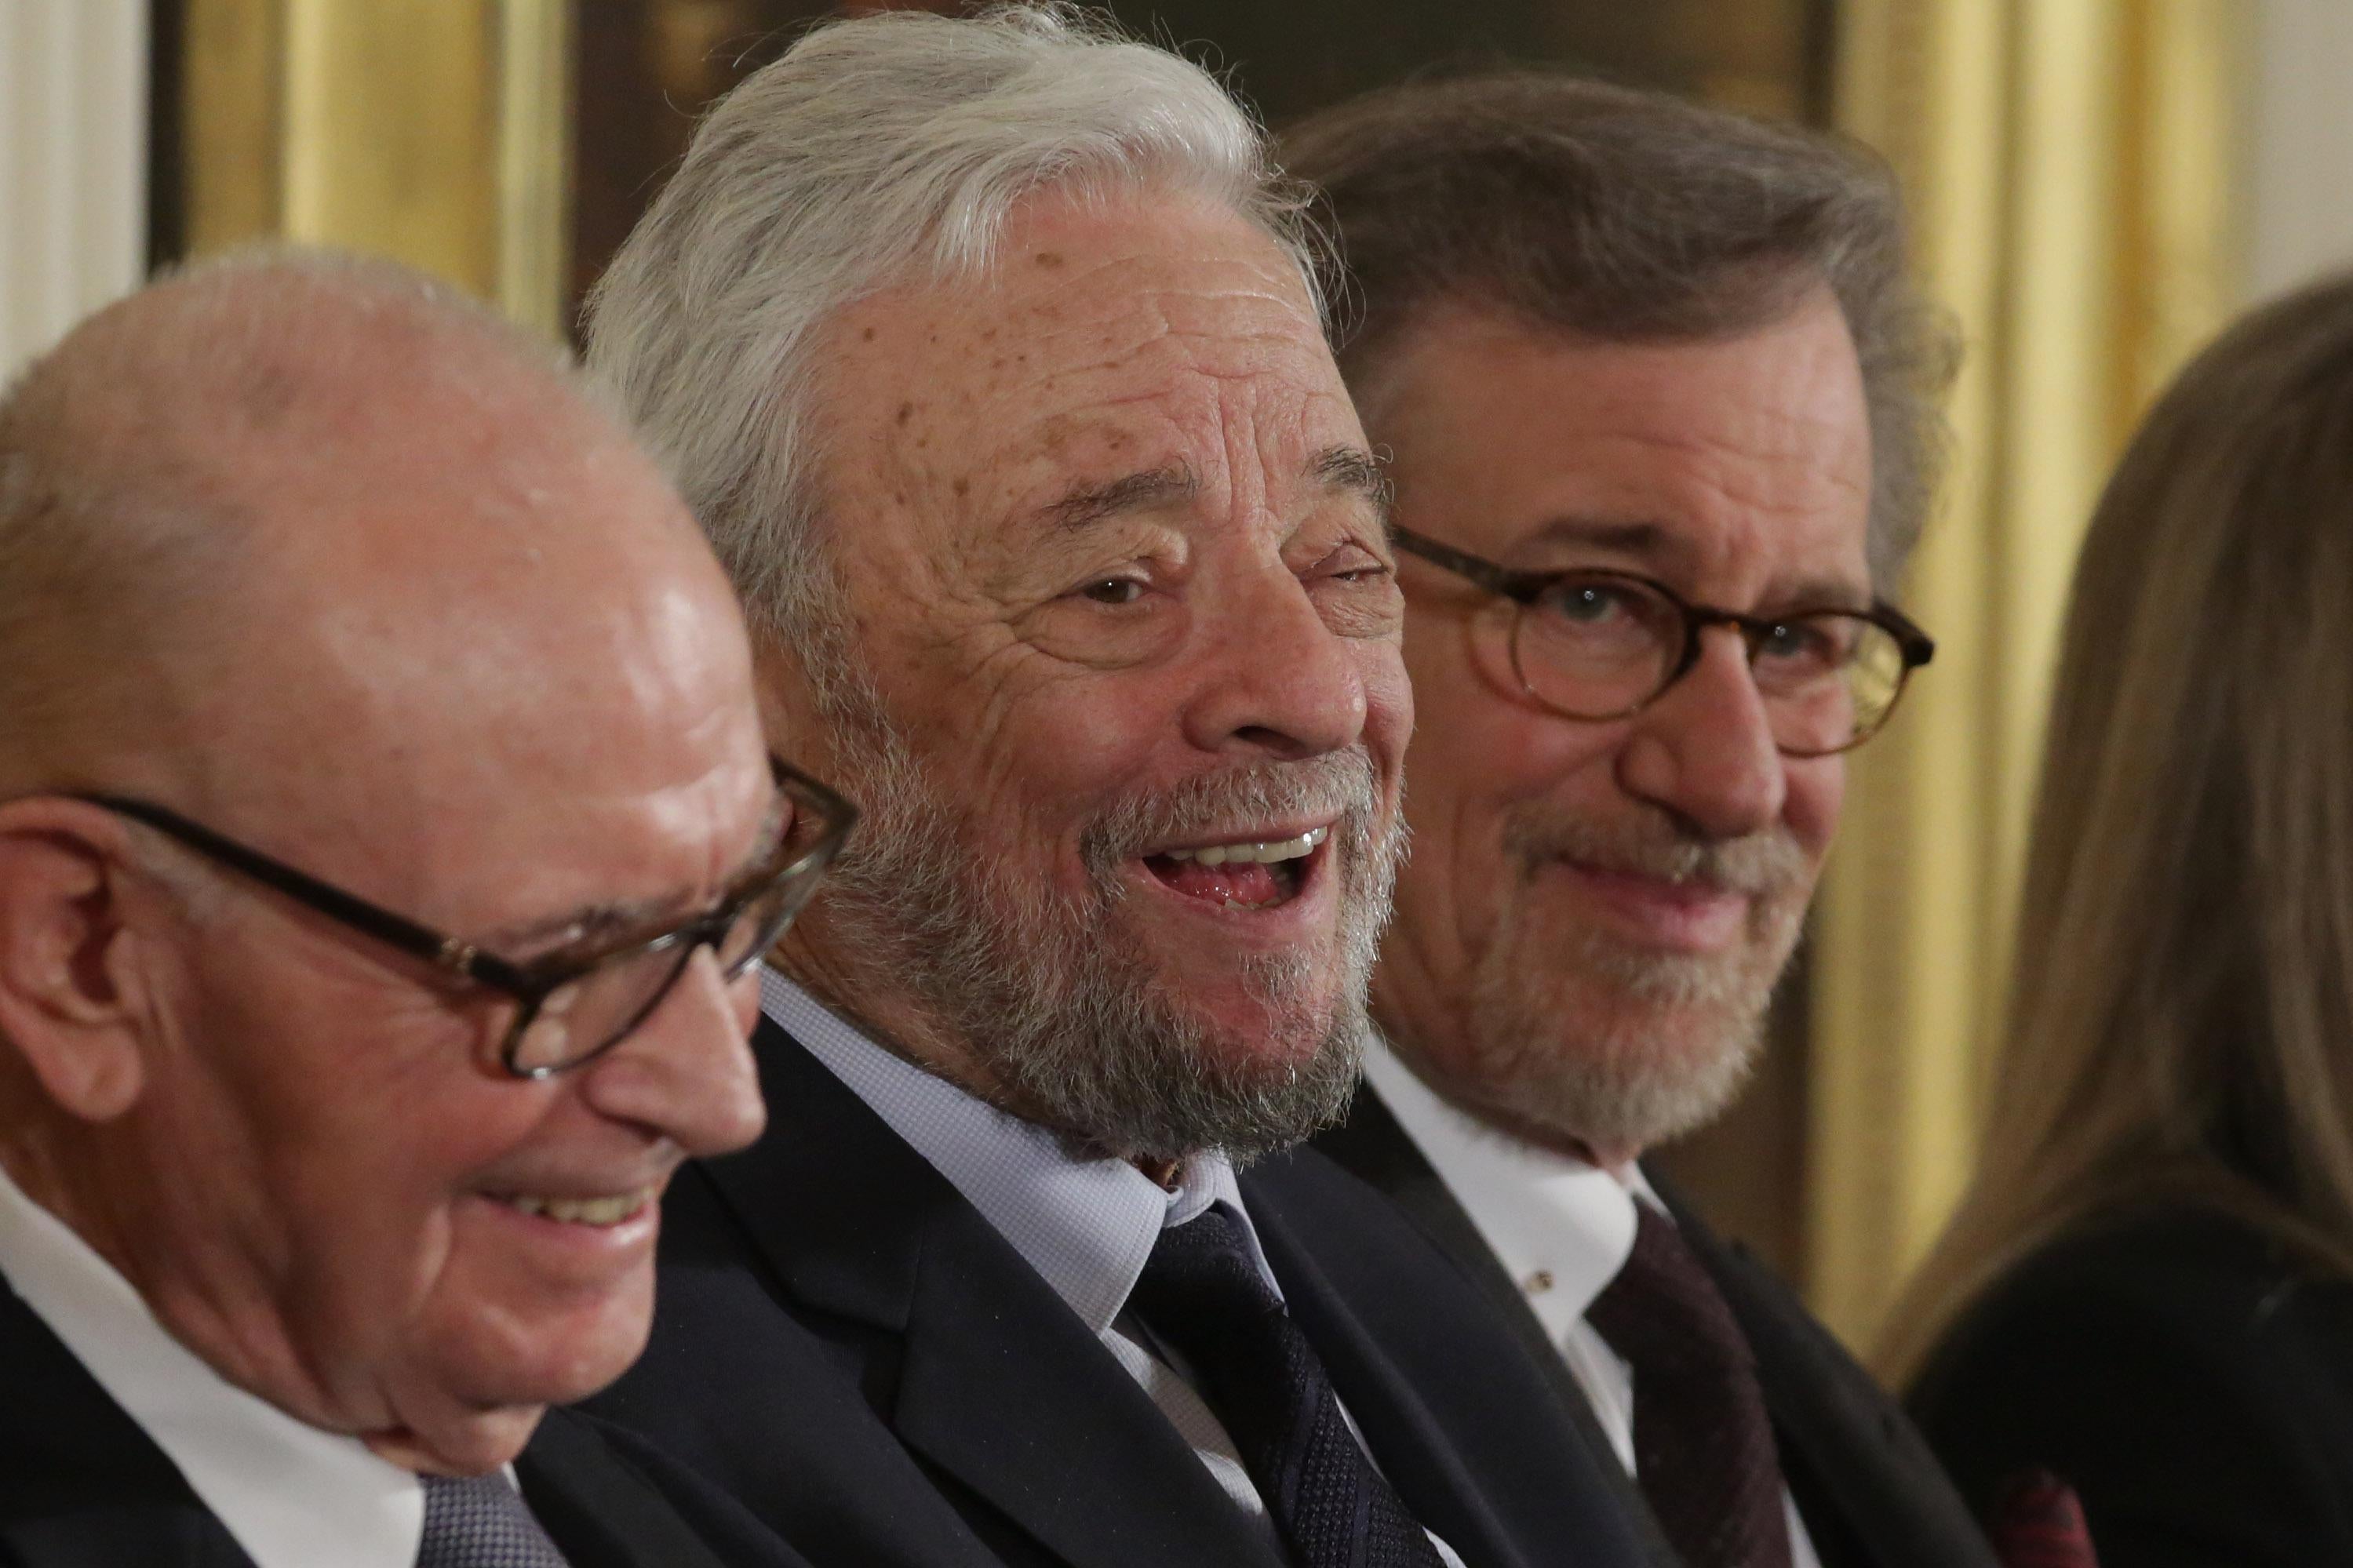 WASHINGTON, DC - NOVEMBER 24: (L-R) Former Rep. Lee Hamilton (D-IN), musical theater legend Stephen Sondheim and filmmaker Steven Spielberg attend a ceremony where they were presented with the Presidential Medal of Freedom in the East Room of the White House November 24, 2015 in Washington, DC. Obama presented the medal to thirteen living and four posthumous pioneers in science, sports, public service, human rights, politics and arts,  (Photo by Chip Somodevilla/Getty Images)